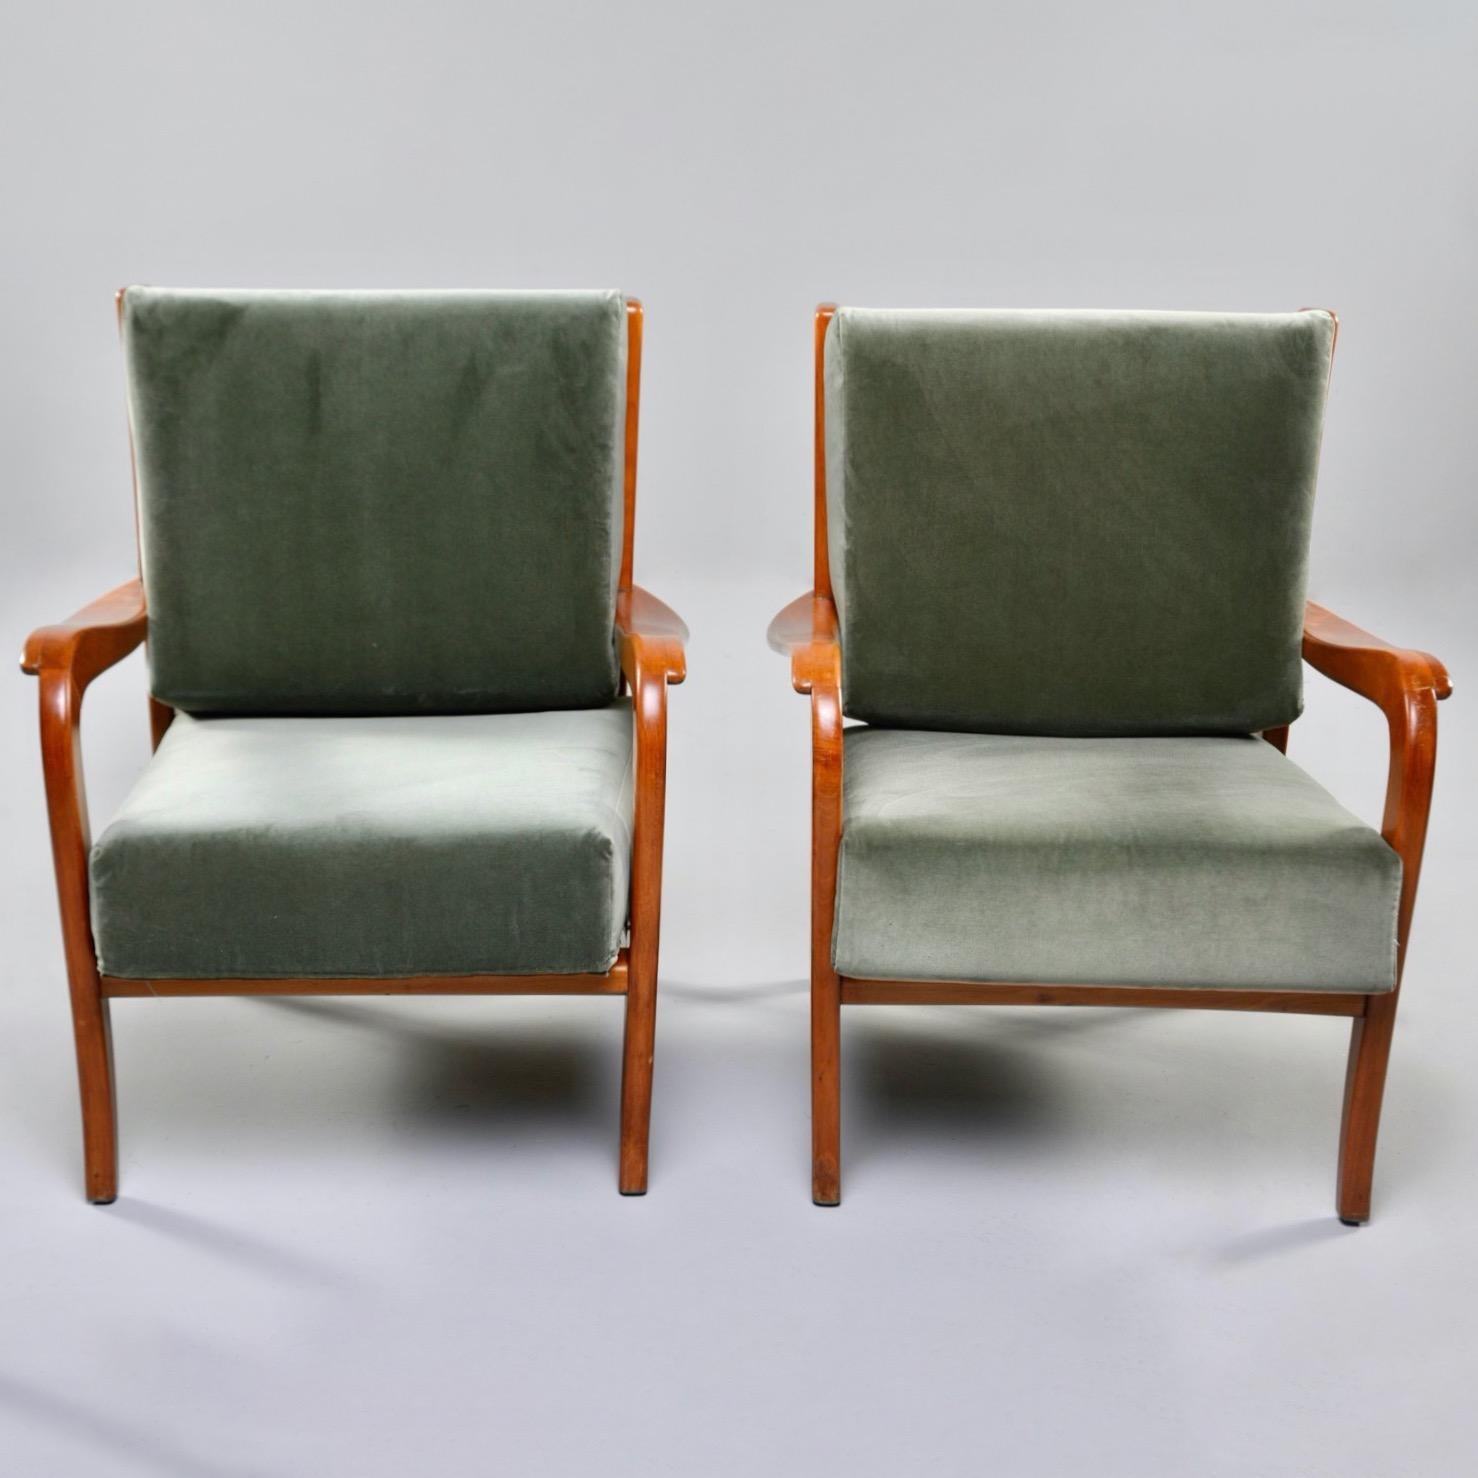 Pair of circa 1950s Italian armchairs feature curvy cherry frames with slatted backs and loose, removable cushions newly upholstered in sage green velvet. Unknown maker. Sold and priced as a pair. 

Measures: Arm height: 20” to 22.5” seat height: